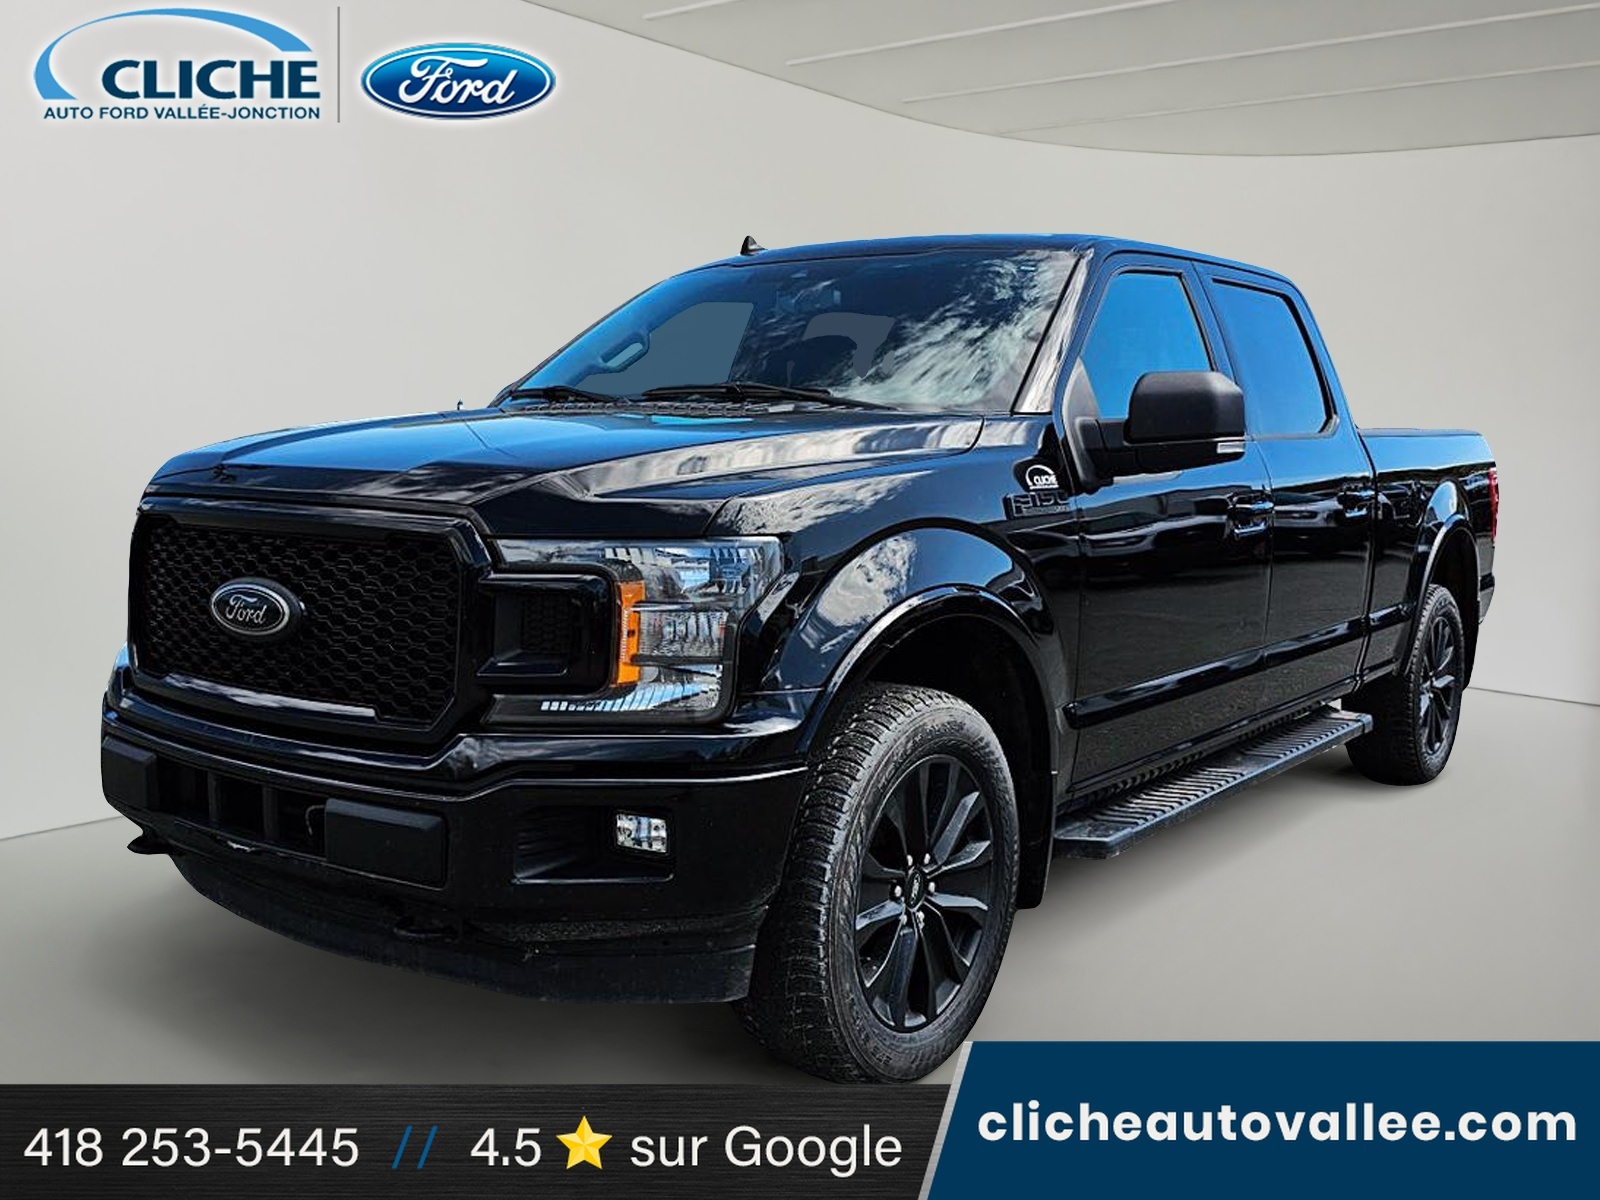 2020 Ford F-150 XLT, SPORT, CREW ECOBOOST 3.5L, 20 PCES